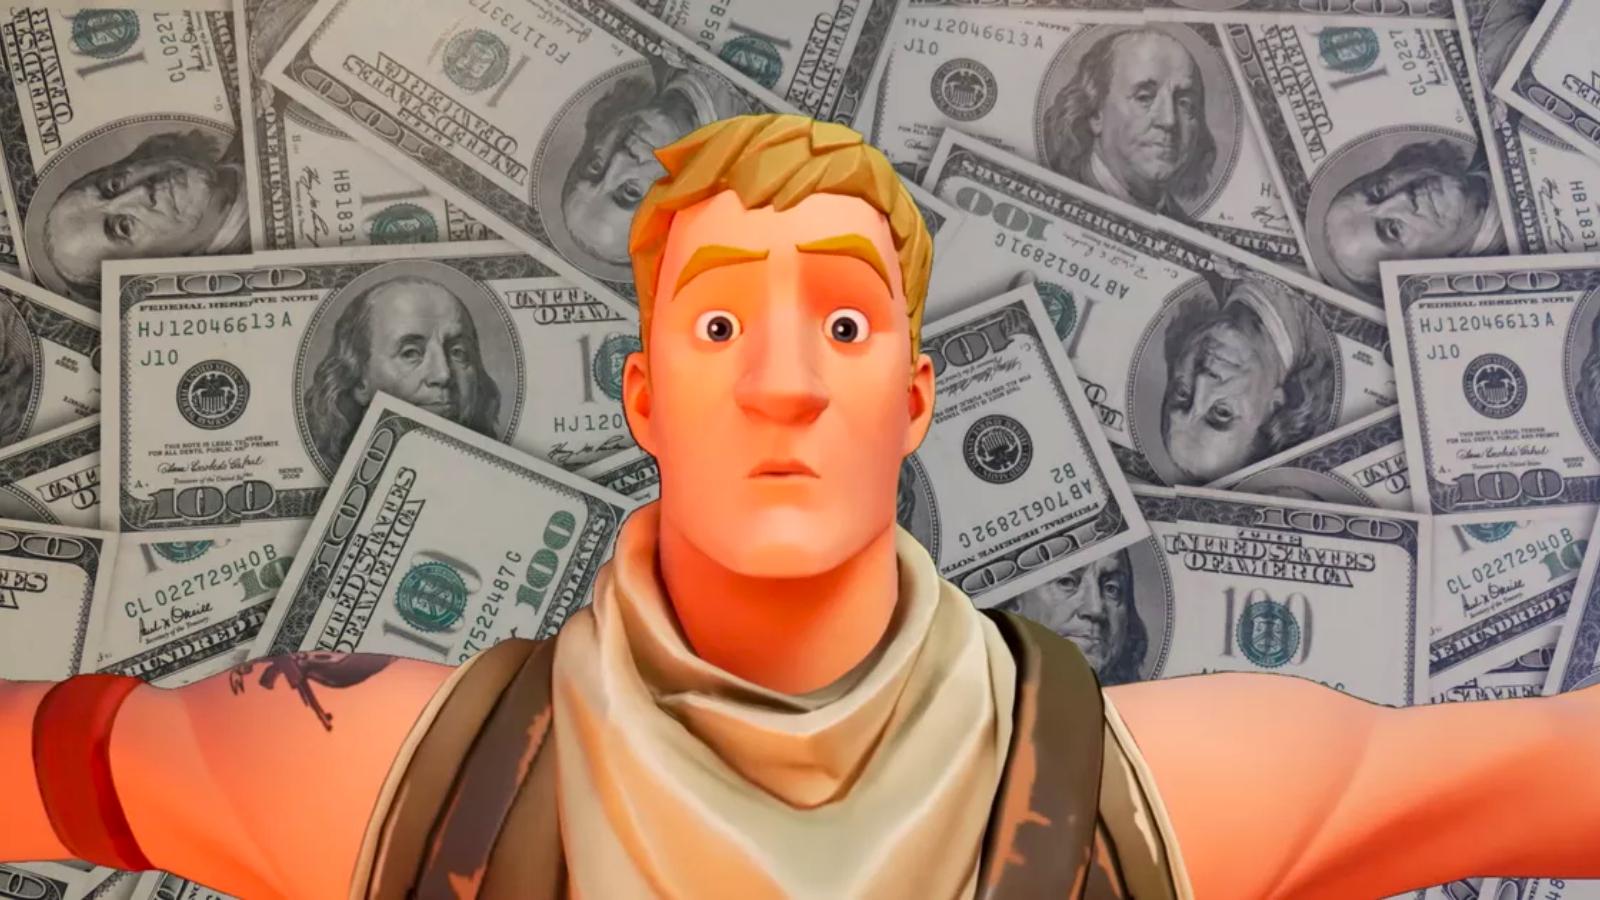 Fortnite player and money.